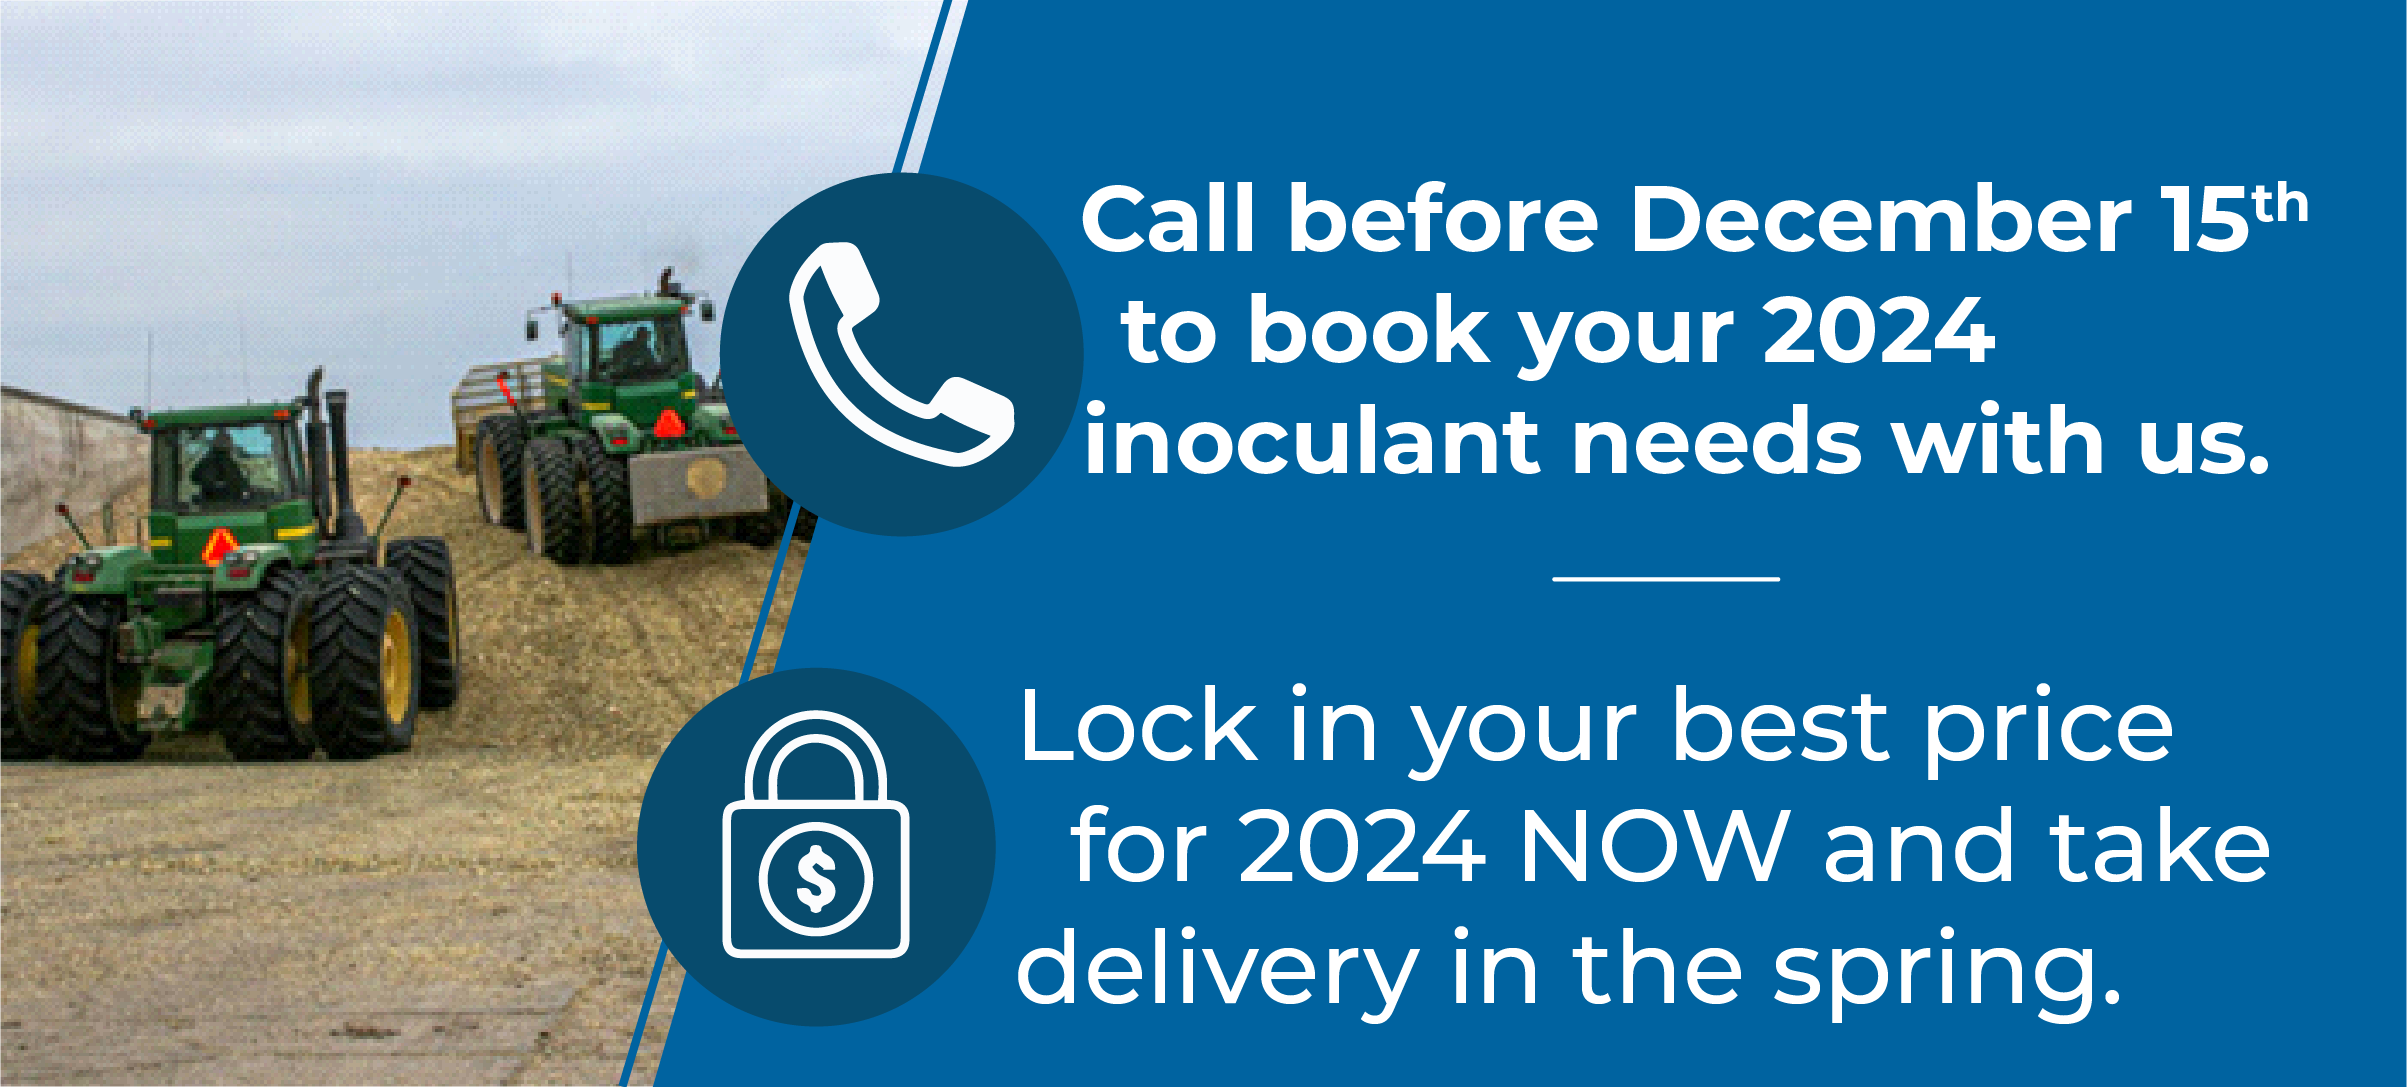 Call before December 15th to book your 2024 inoculant needs with us. | Lock in your best price for 2024 NOW and take delivery in the spring. 